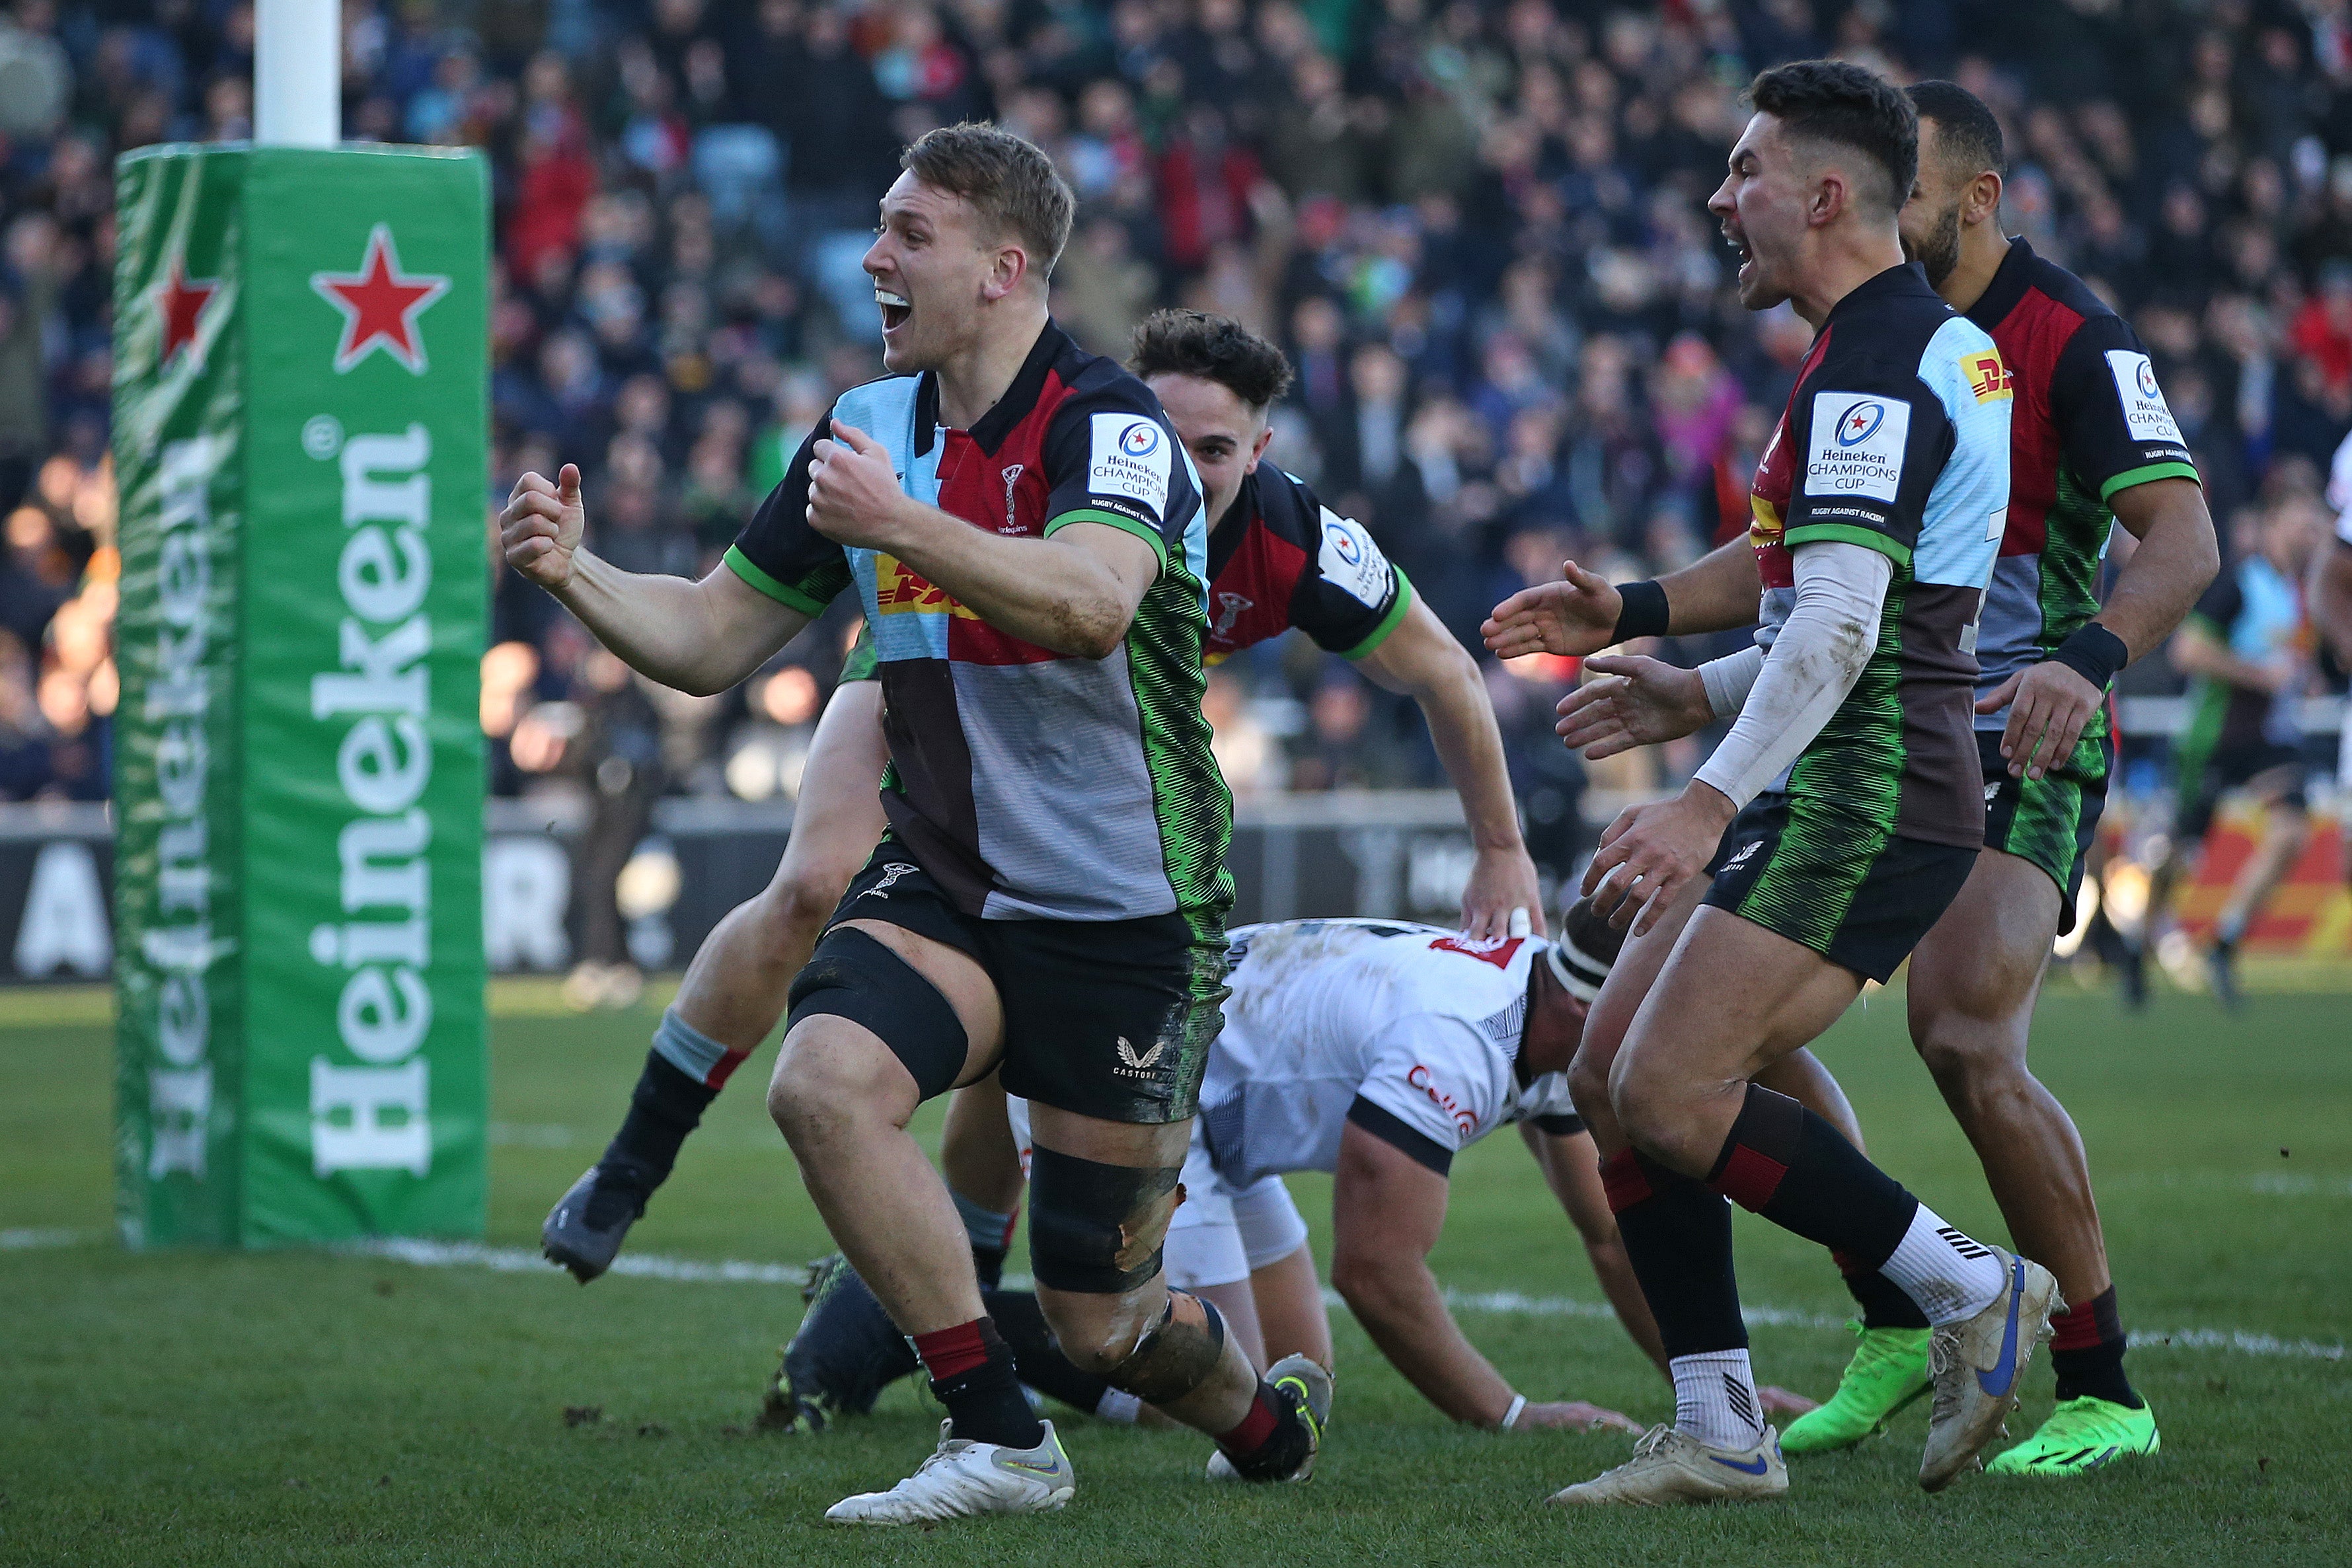 Harlequins impressed to down the Sharks